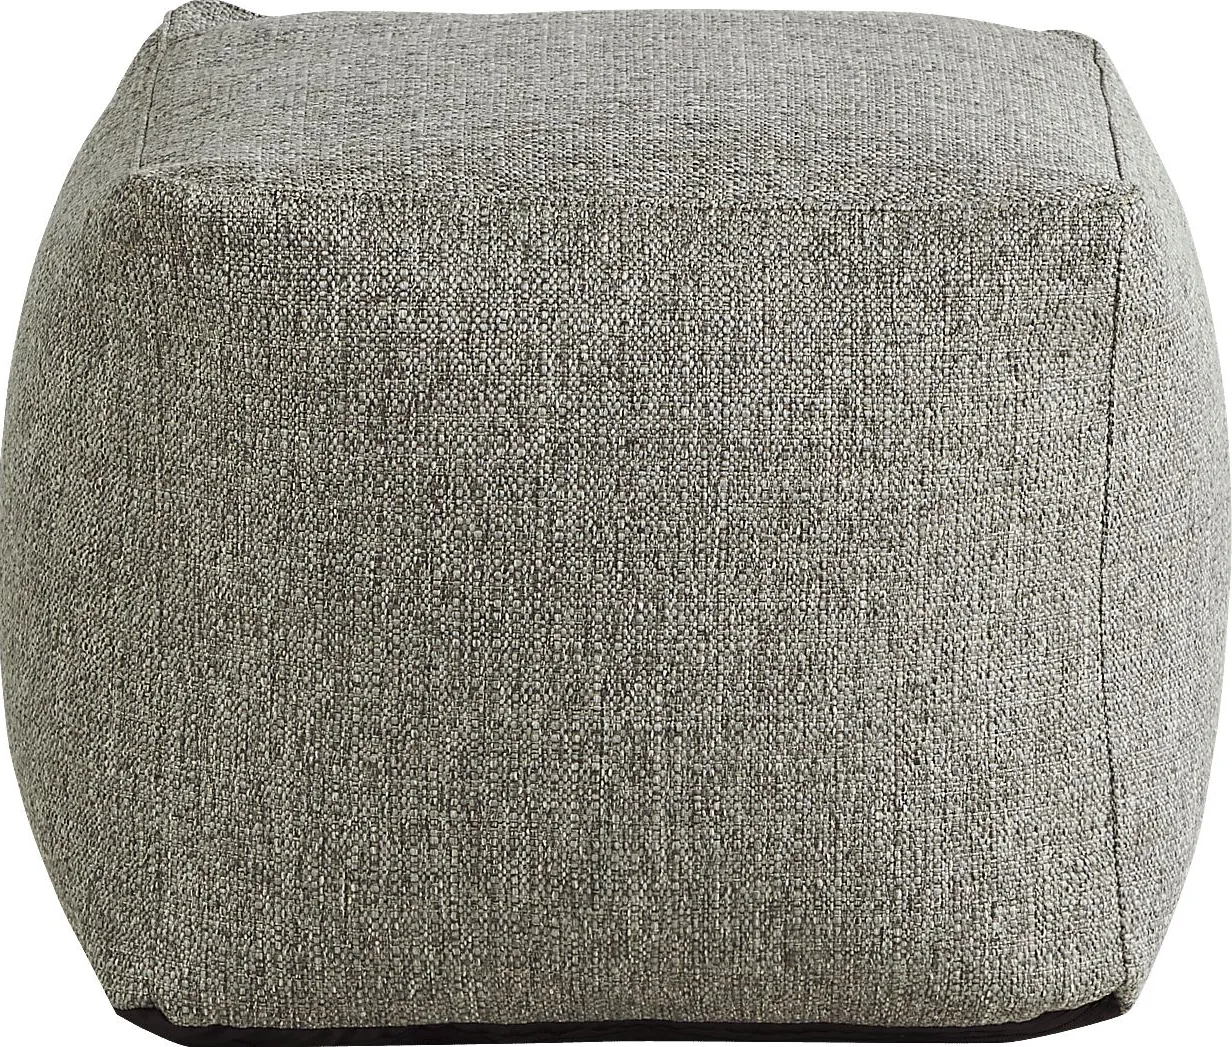 Hanover Gray Textured Accent Pouf